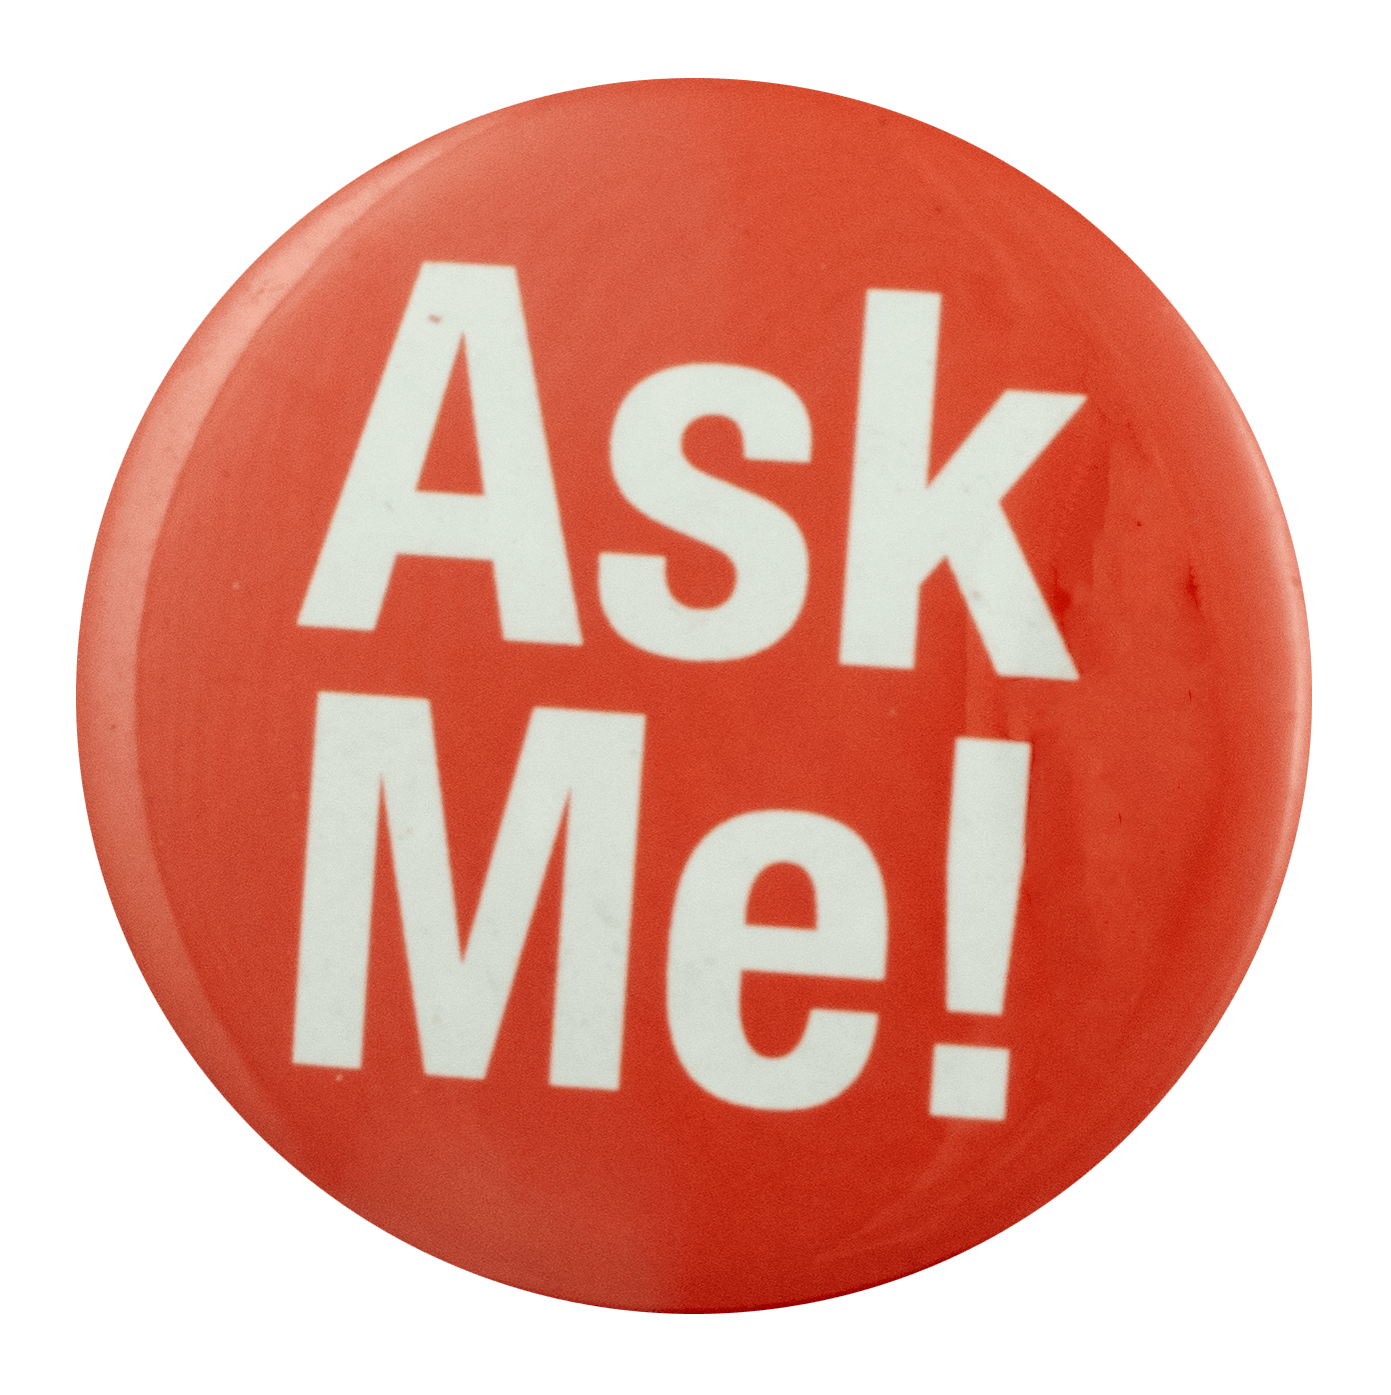 Ask Me! Ask Me Busy Beaver Button Museum